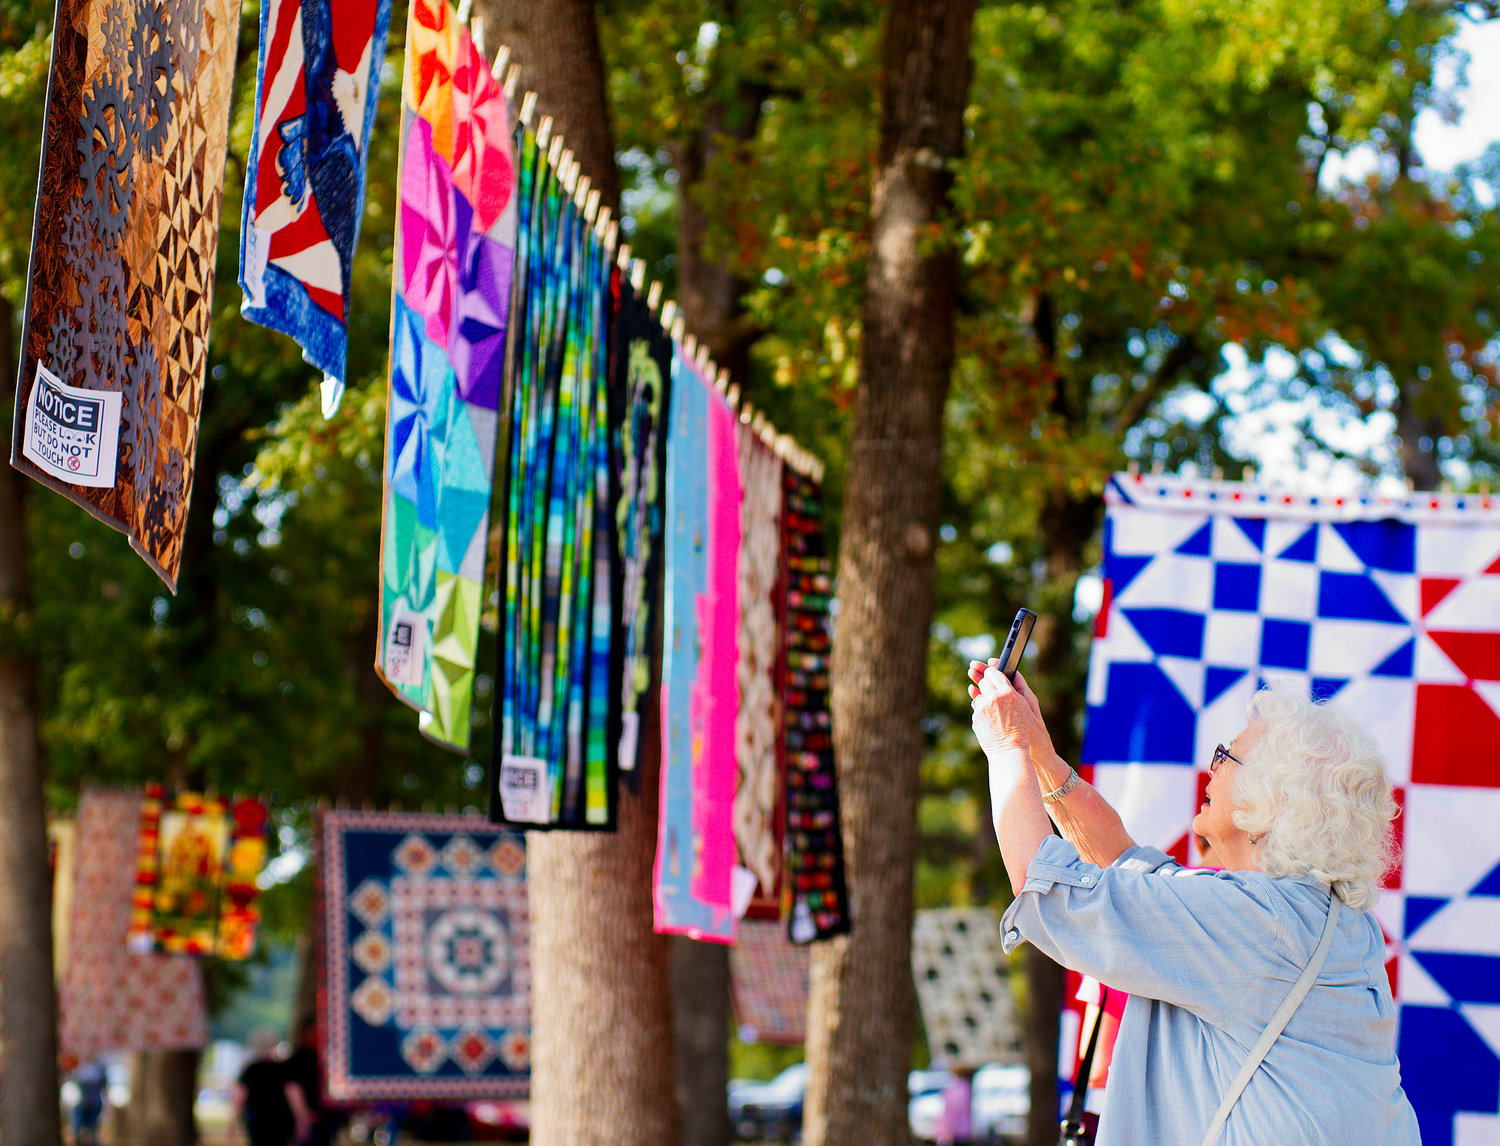 Stephanie Hauson snaps photos of her favorite stitches during Quilts in the Park.